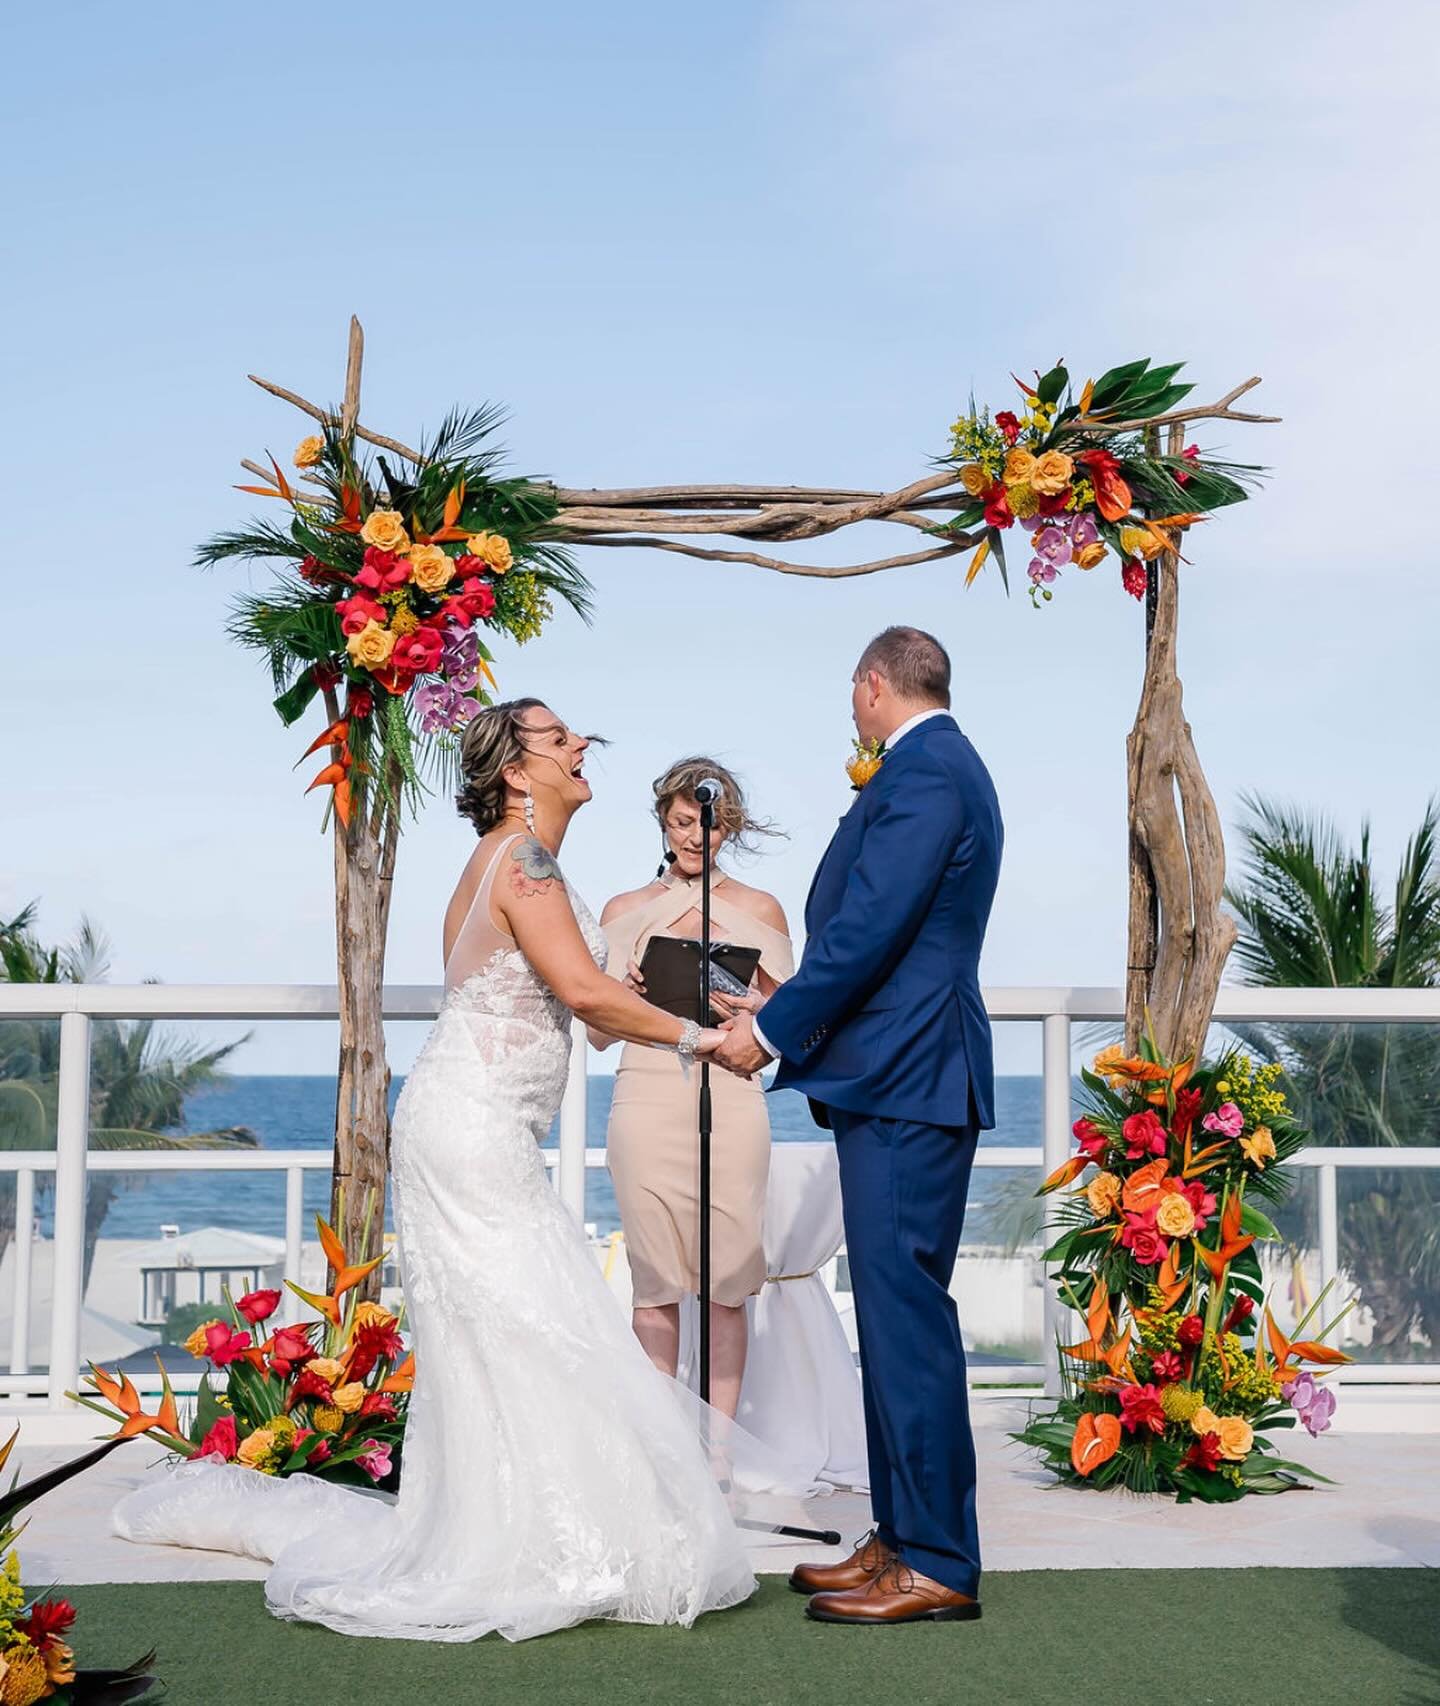 A year of love for these two, can&rsquo;t believe it&rsquo;s been a year since Heather and Josh&rsquo;s tropical wedding in Pompano Beach 🌴
&mdash;&mdash;&mdash;
📷 @gloriaruthphoto